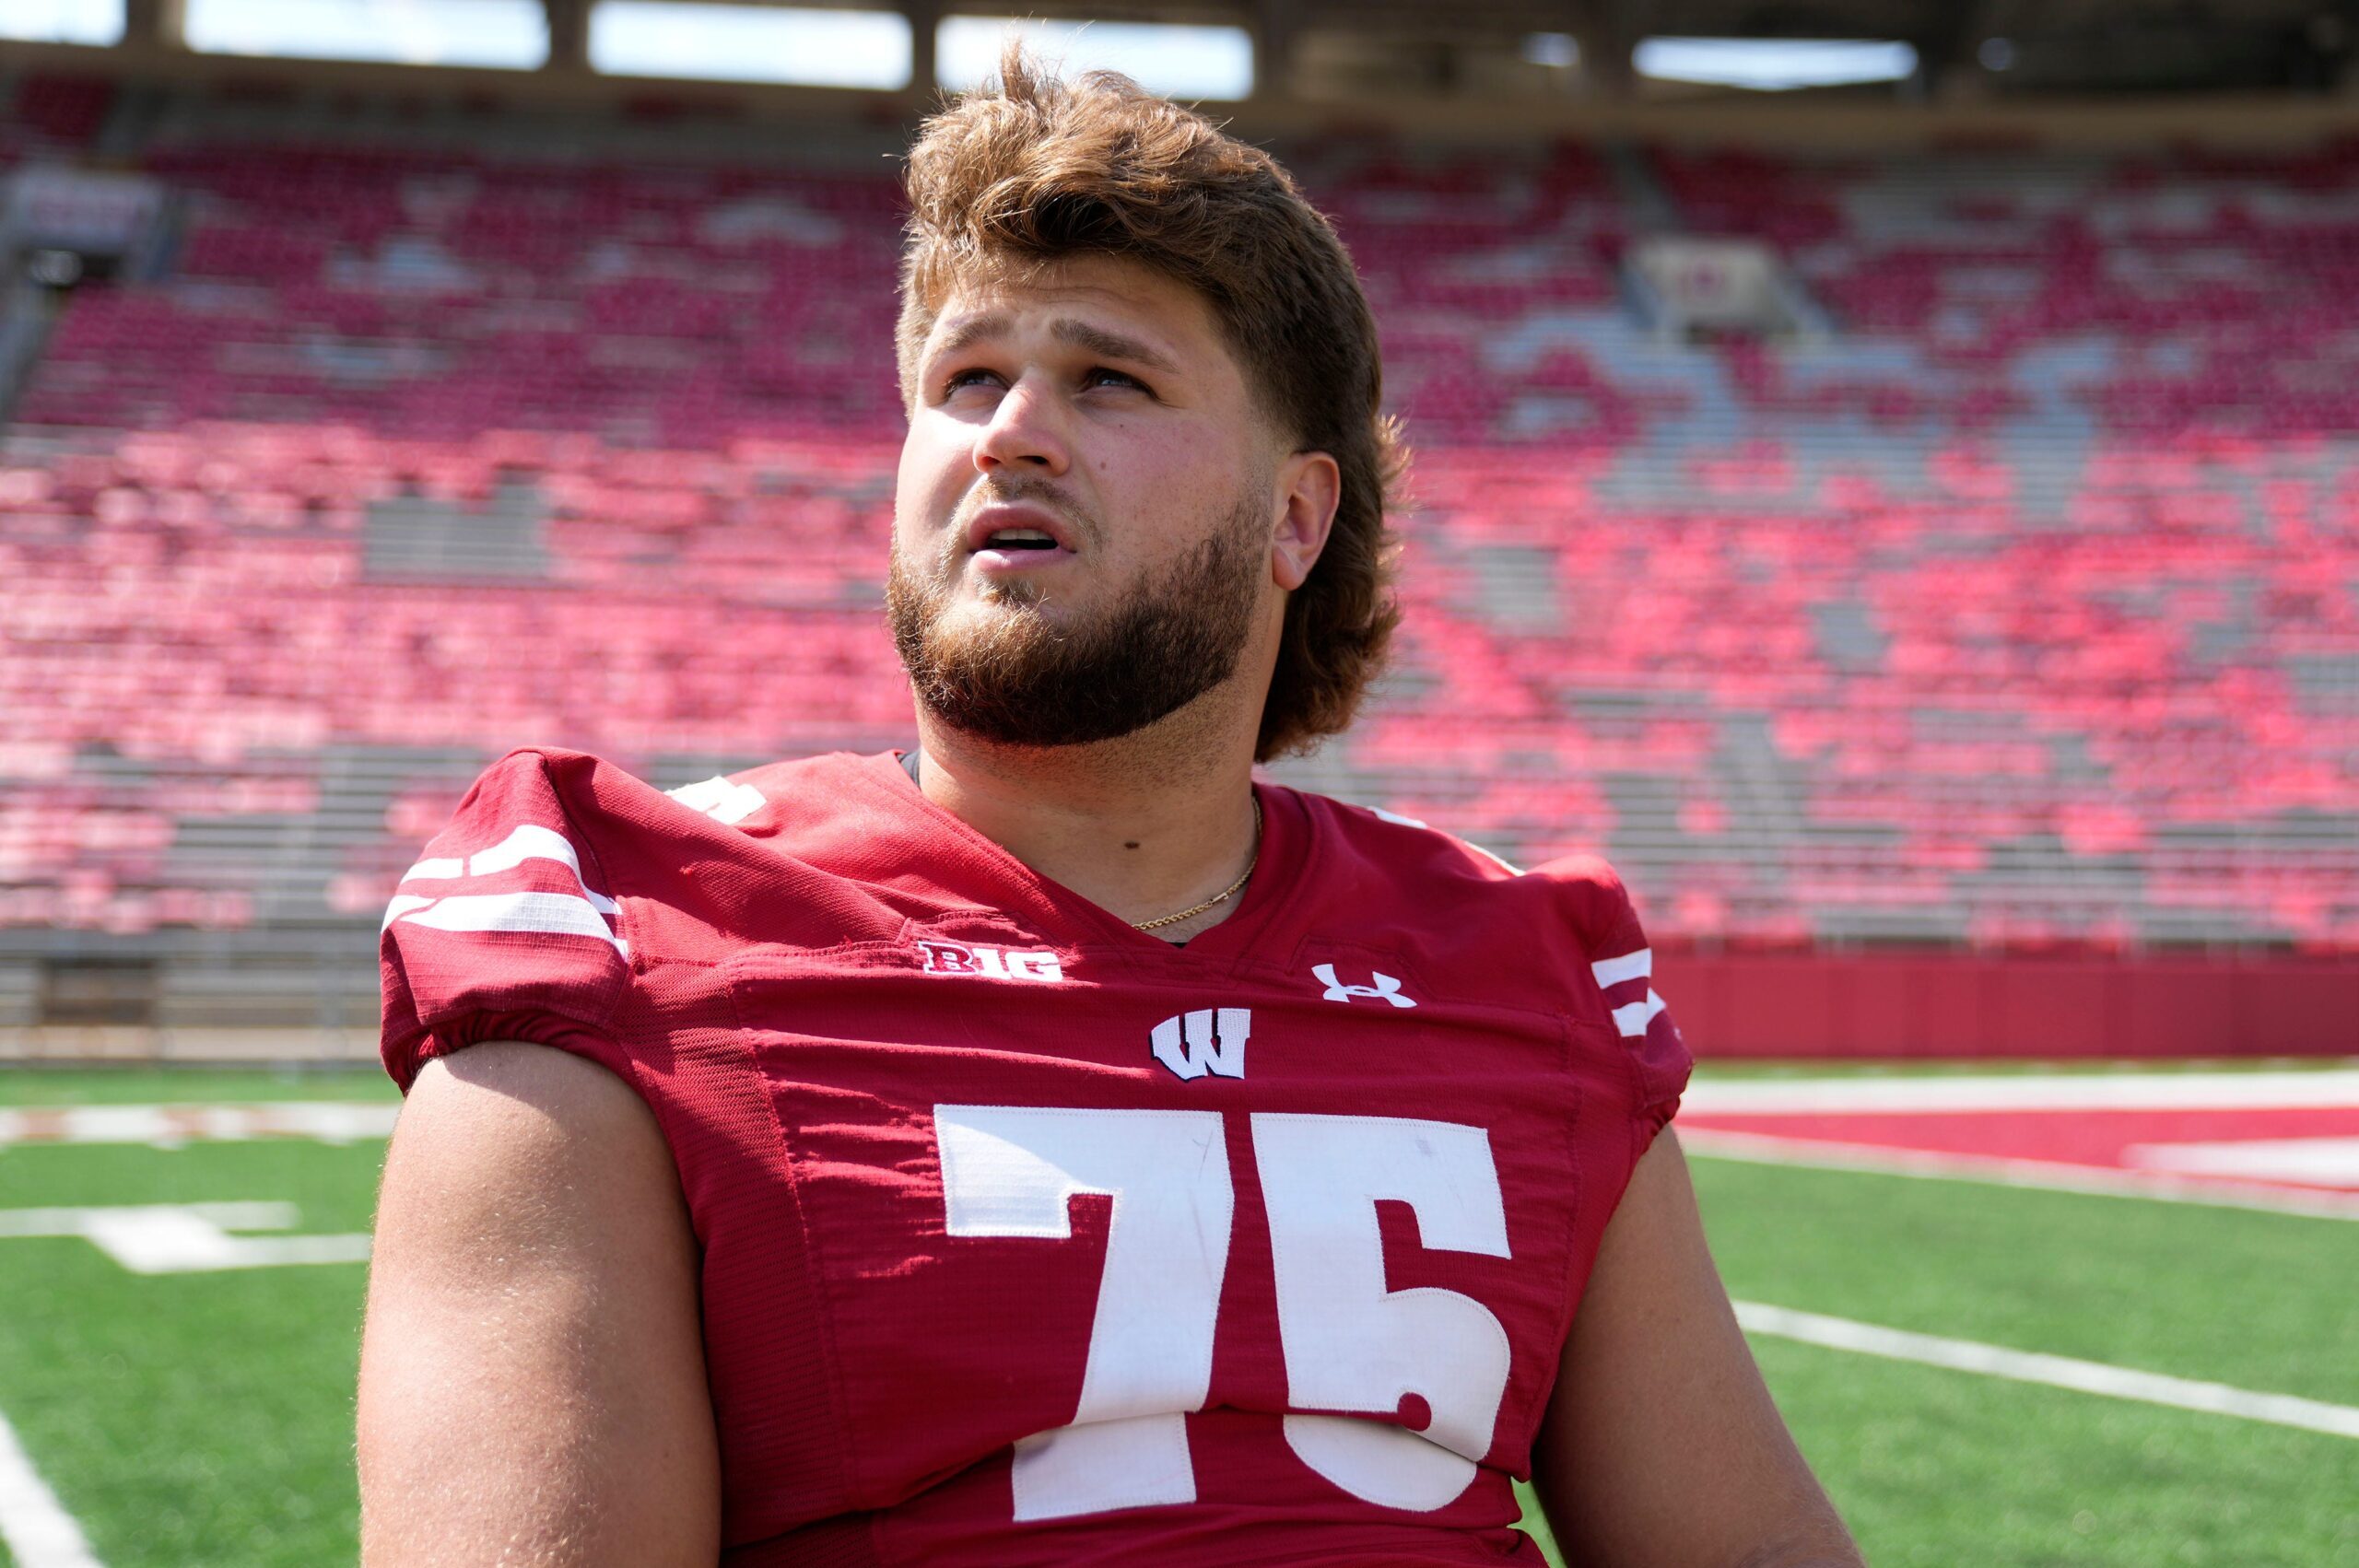 Wisconsin football offensive lineman Joe Tippman was selected the the 45th overall pick by the New York Jets in the 2023 NFL Draft